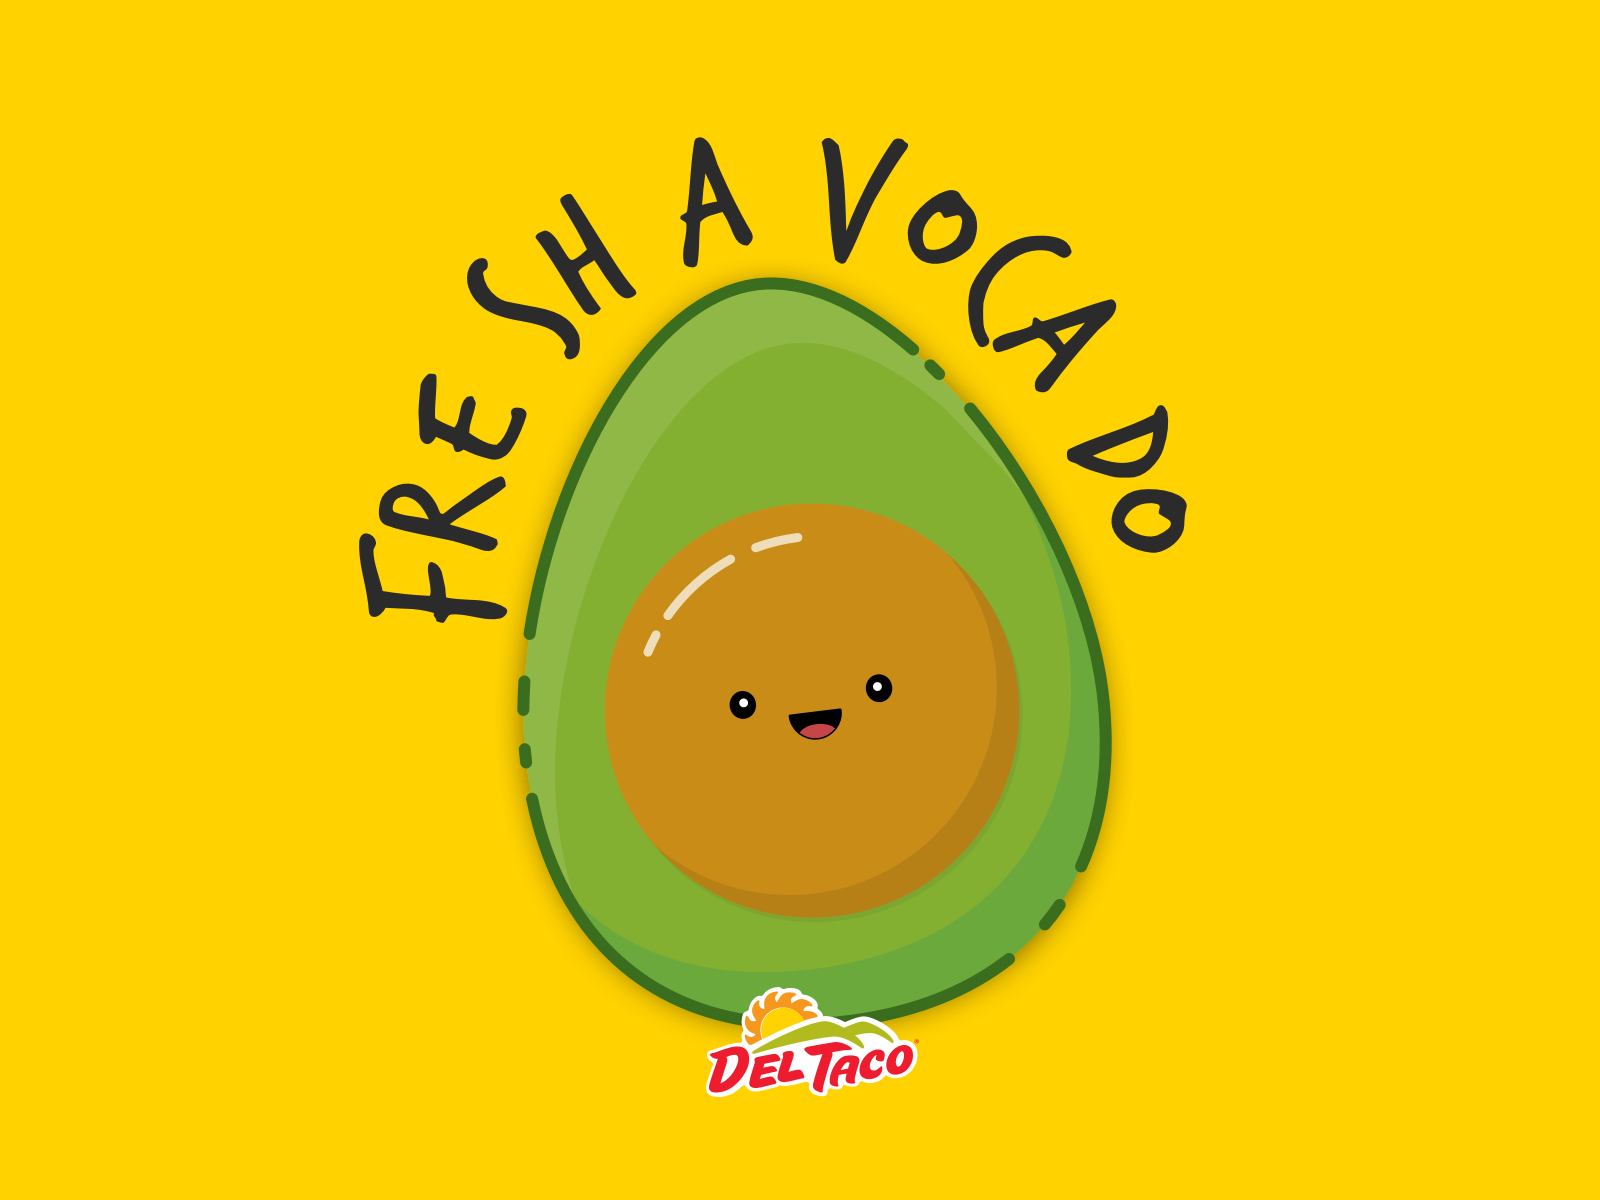 Fre Sha Voca Do By Andy Holmes On Dribbble